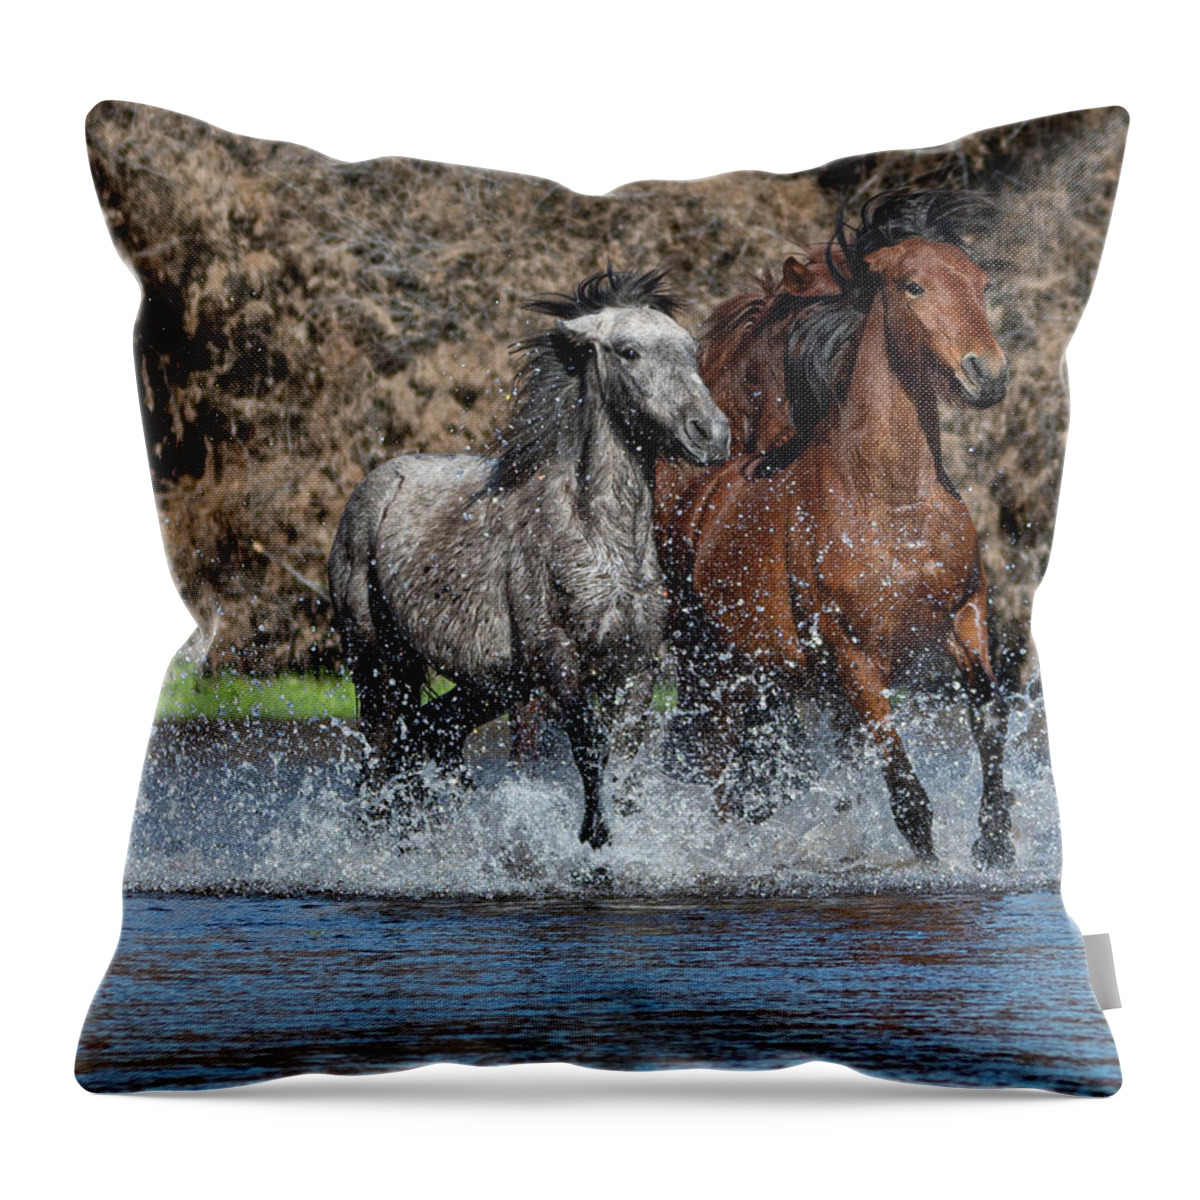 Wild Horses Throw Pillow featuring the photograph Full Speed by Mary Hone